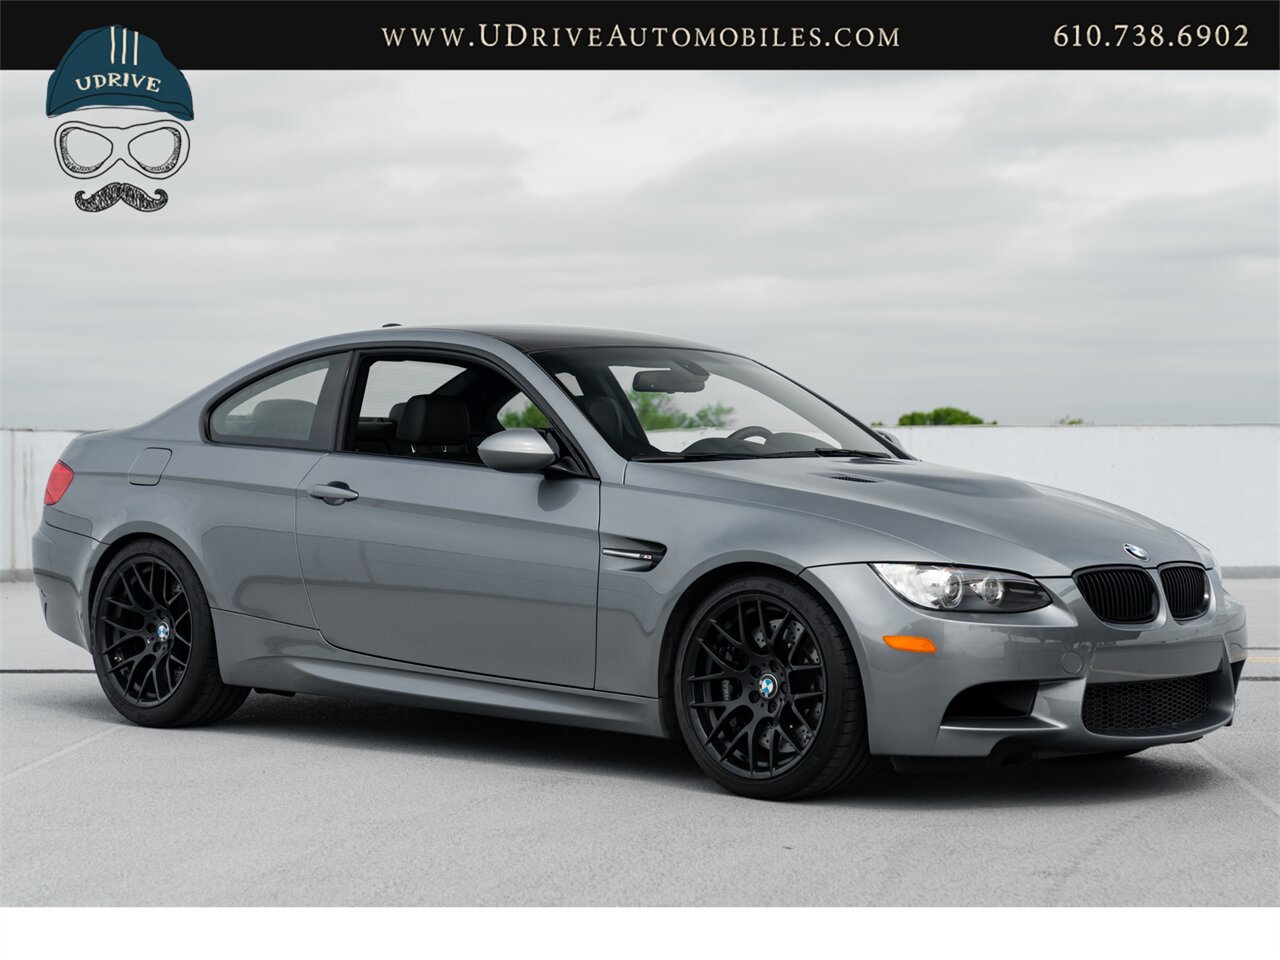 2012 BMW M3 E92 6 Speed 7k Miles Dinan Upgrades  GTS/359 Wheels Carbon Fiber Roof - Photo 14 - West Chester, PA 19382